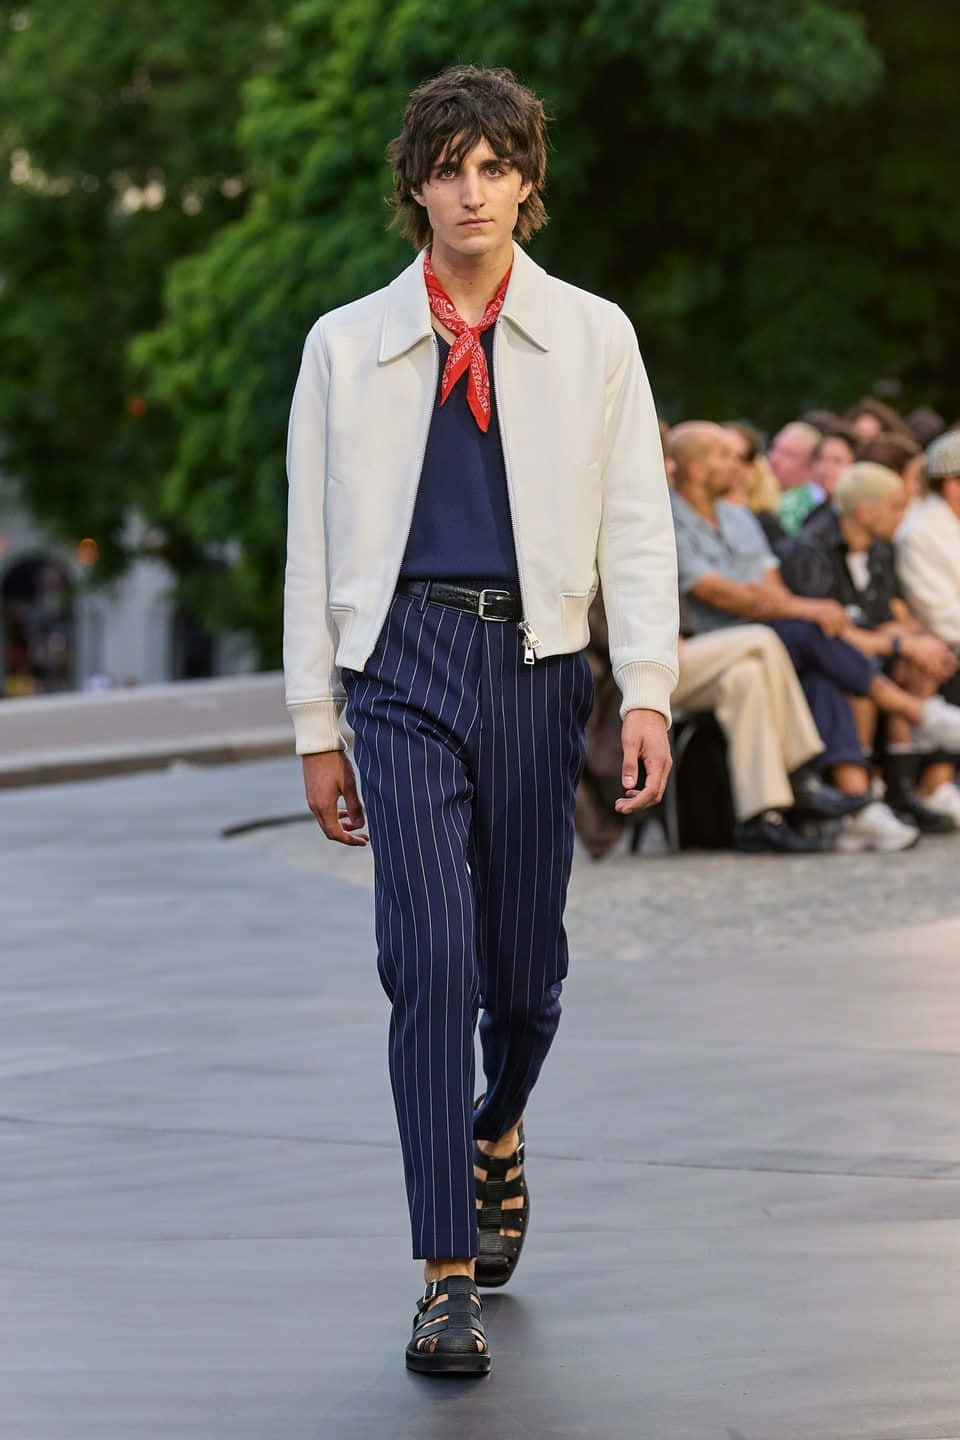 A Man In A White Jacket And Striped Pants Walks Down The Runway